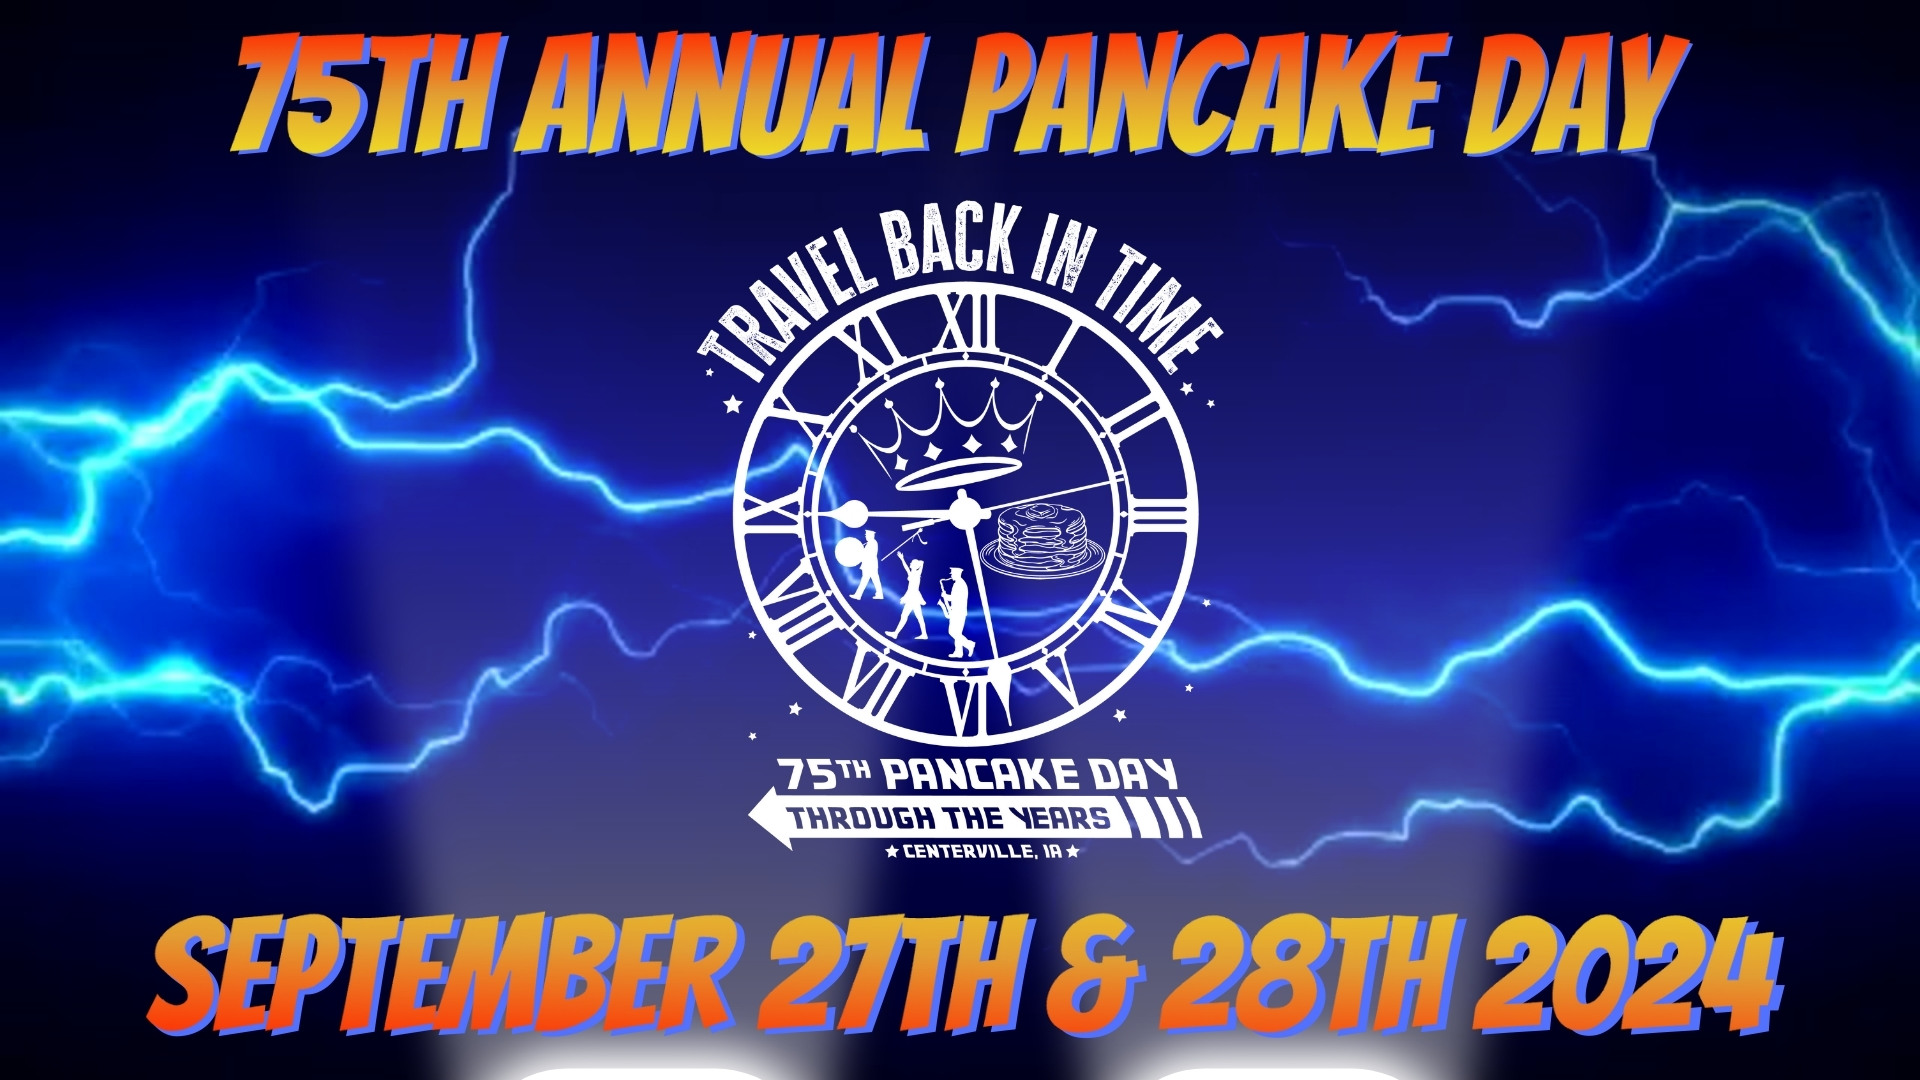 75th Annual Pancake Day - Travel Back in Time